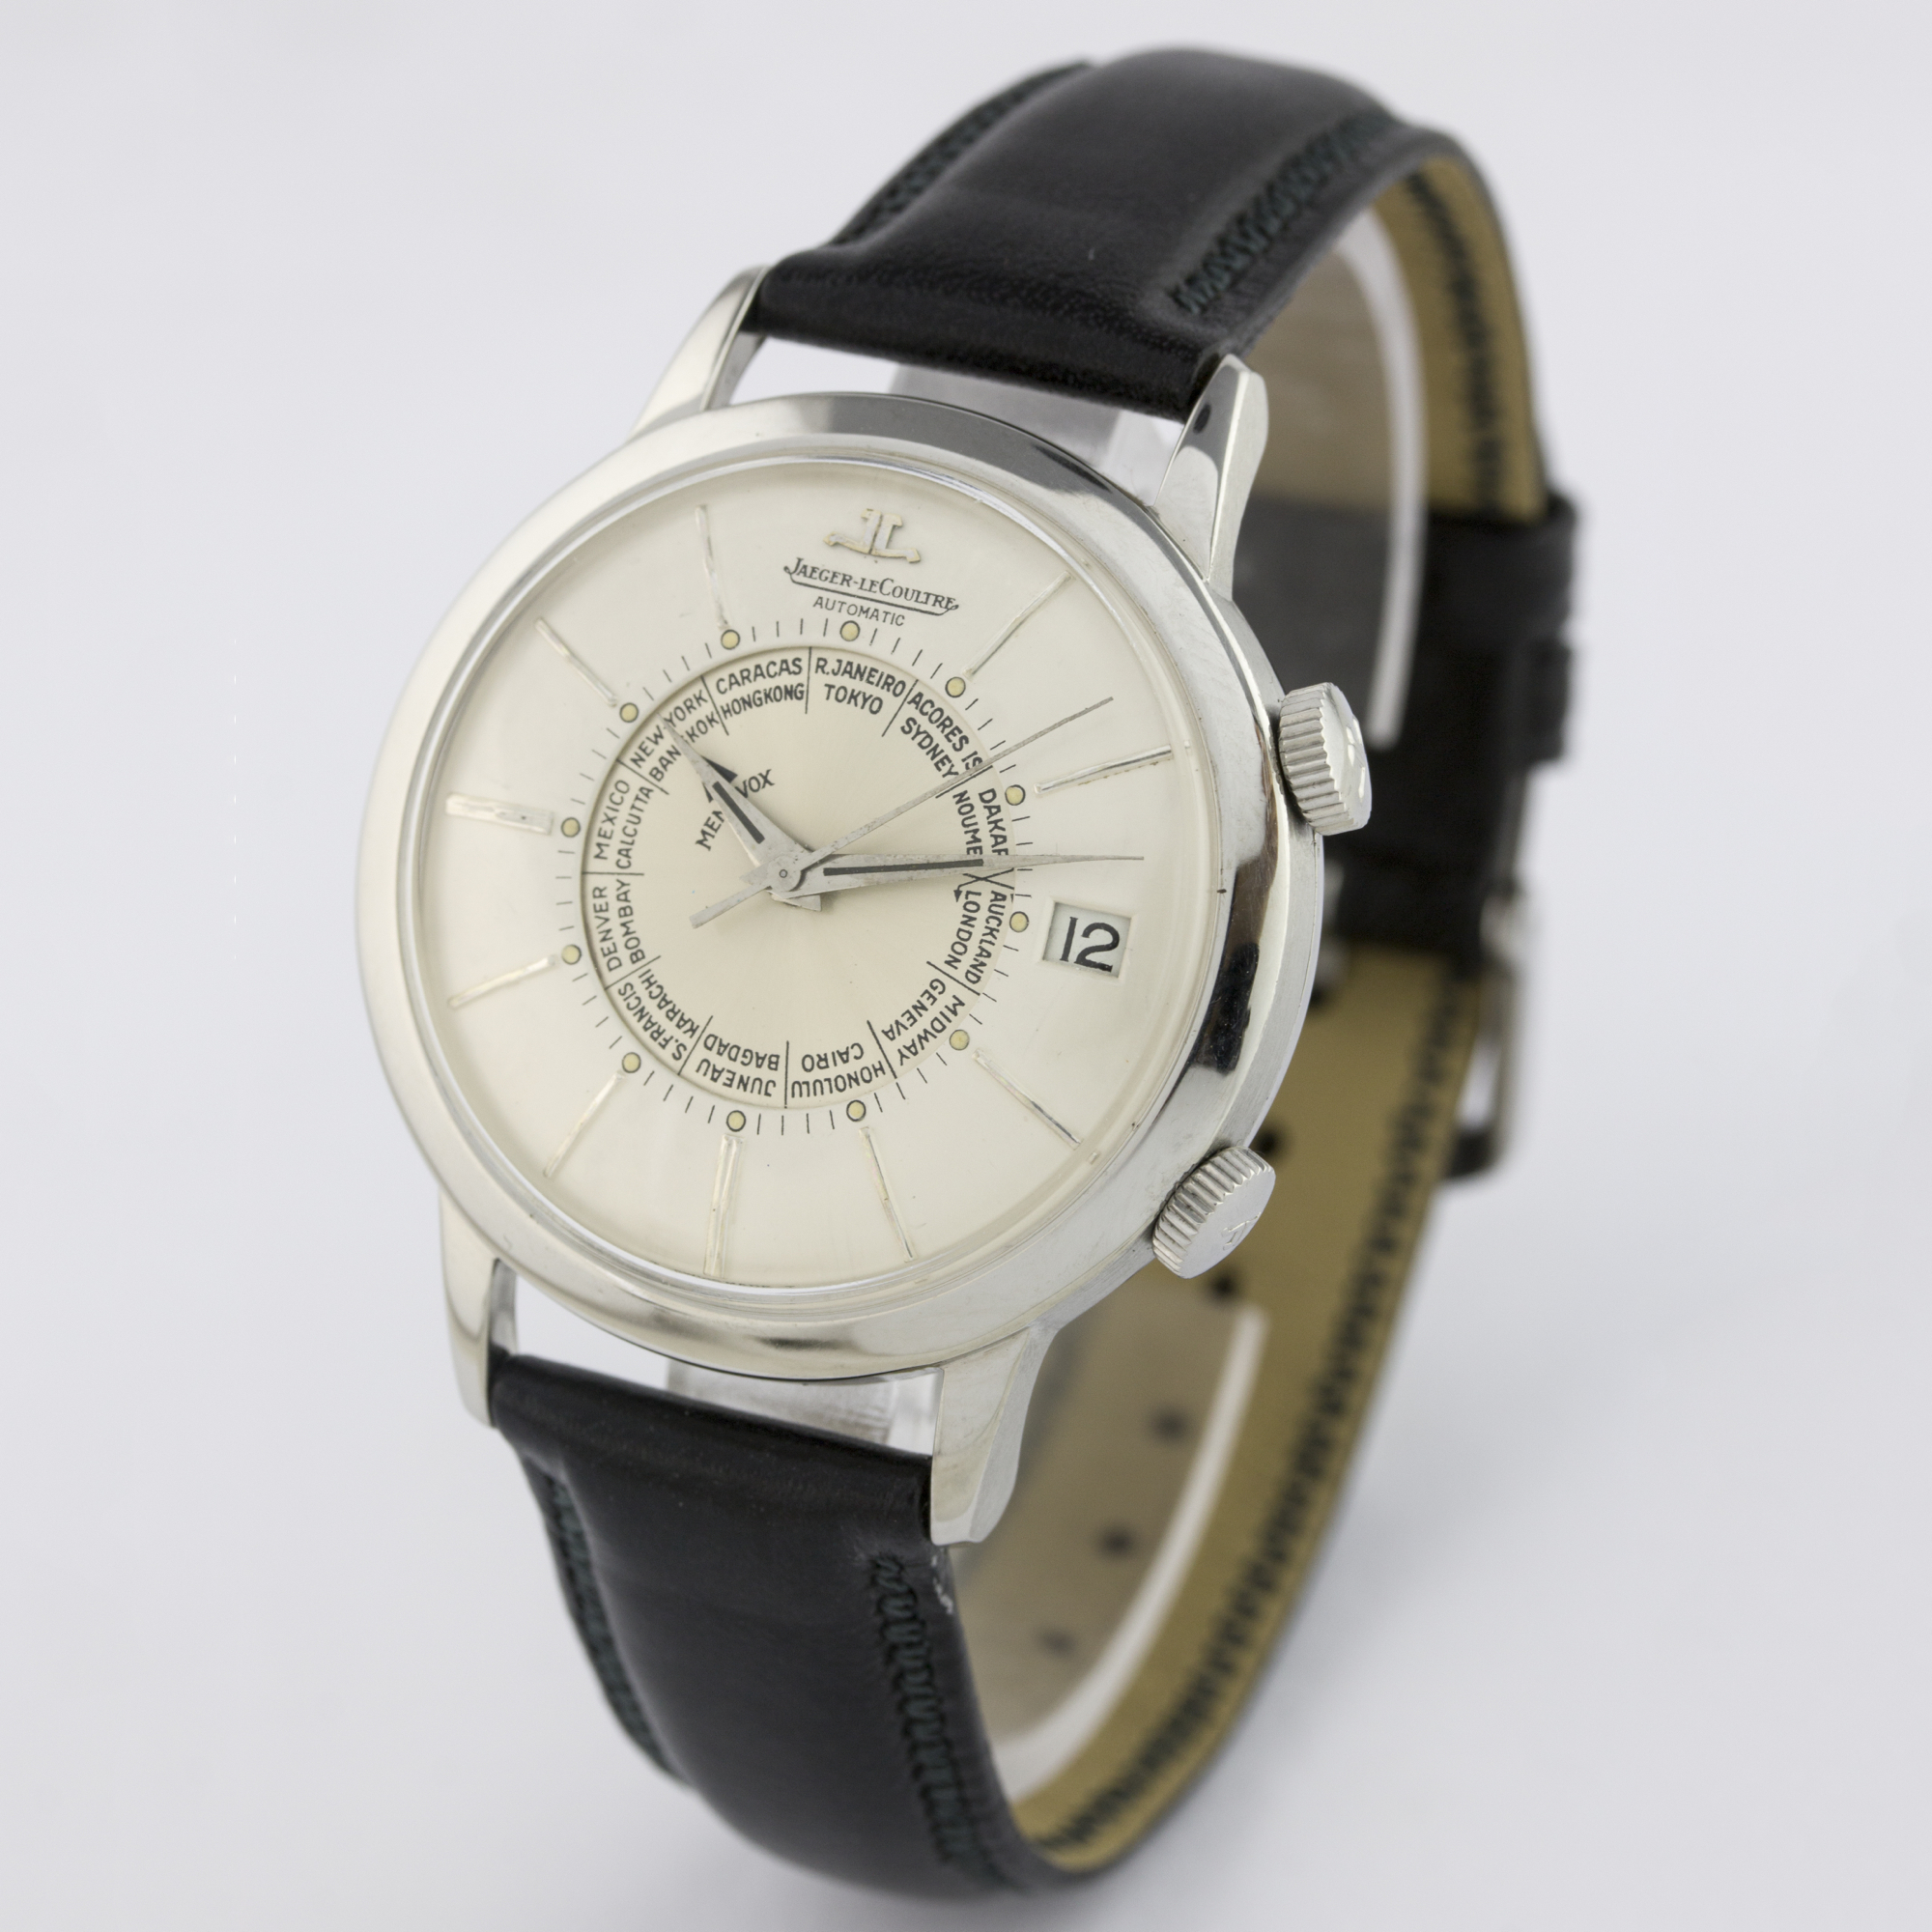 A GENTLEMAN'S STAINLESS STEEL JAEGER LECOULTRE AUTOMATIC MEMOVOX ALARM WRIST WATCH CIRCA 1960s D: - Image 3 of 7